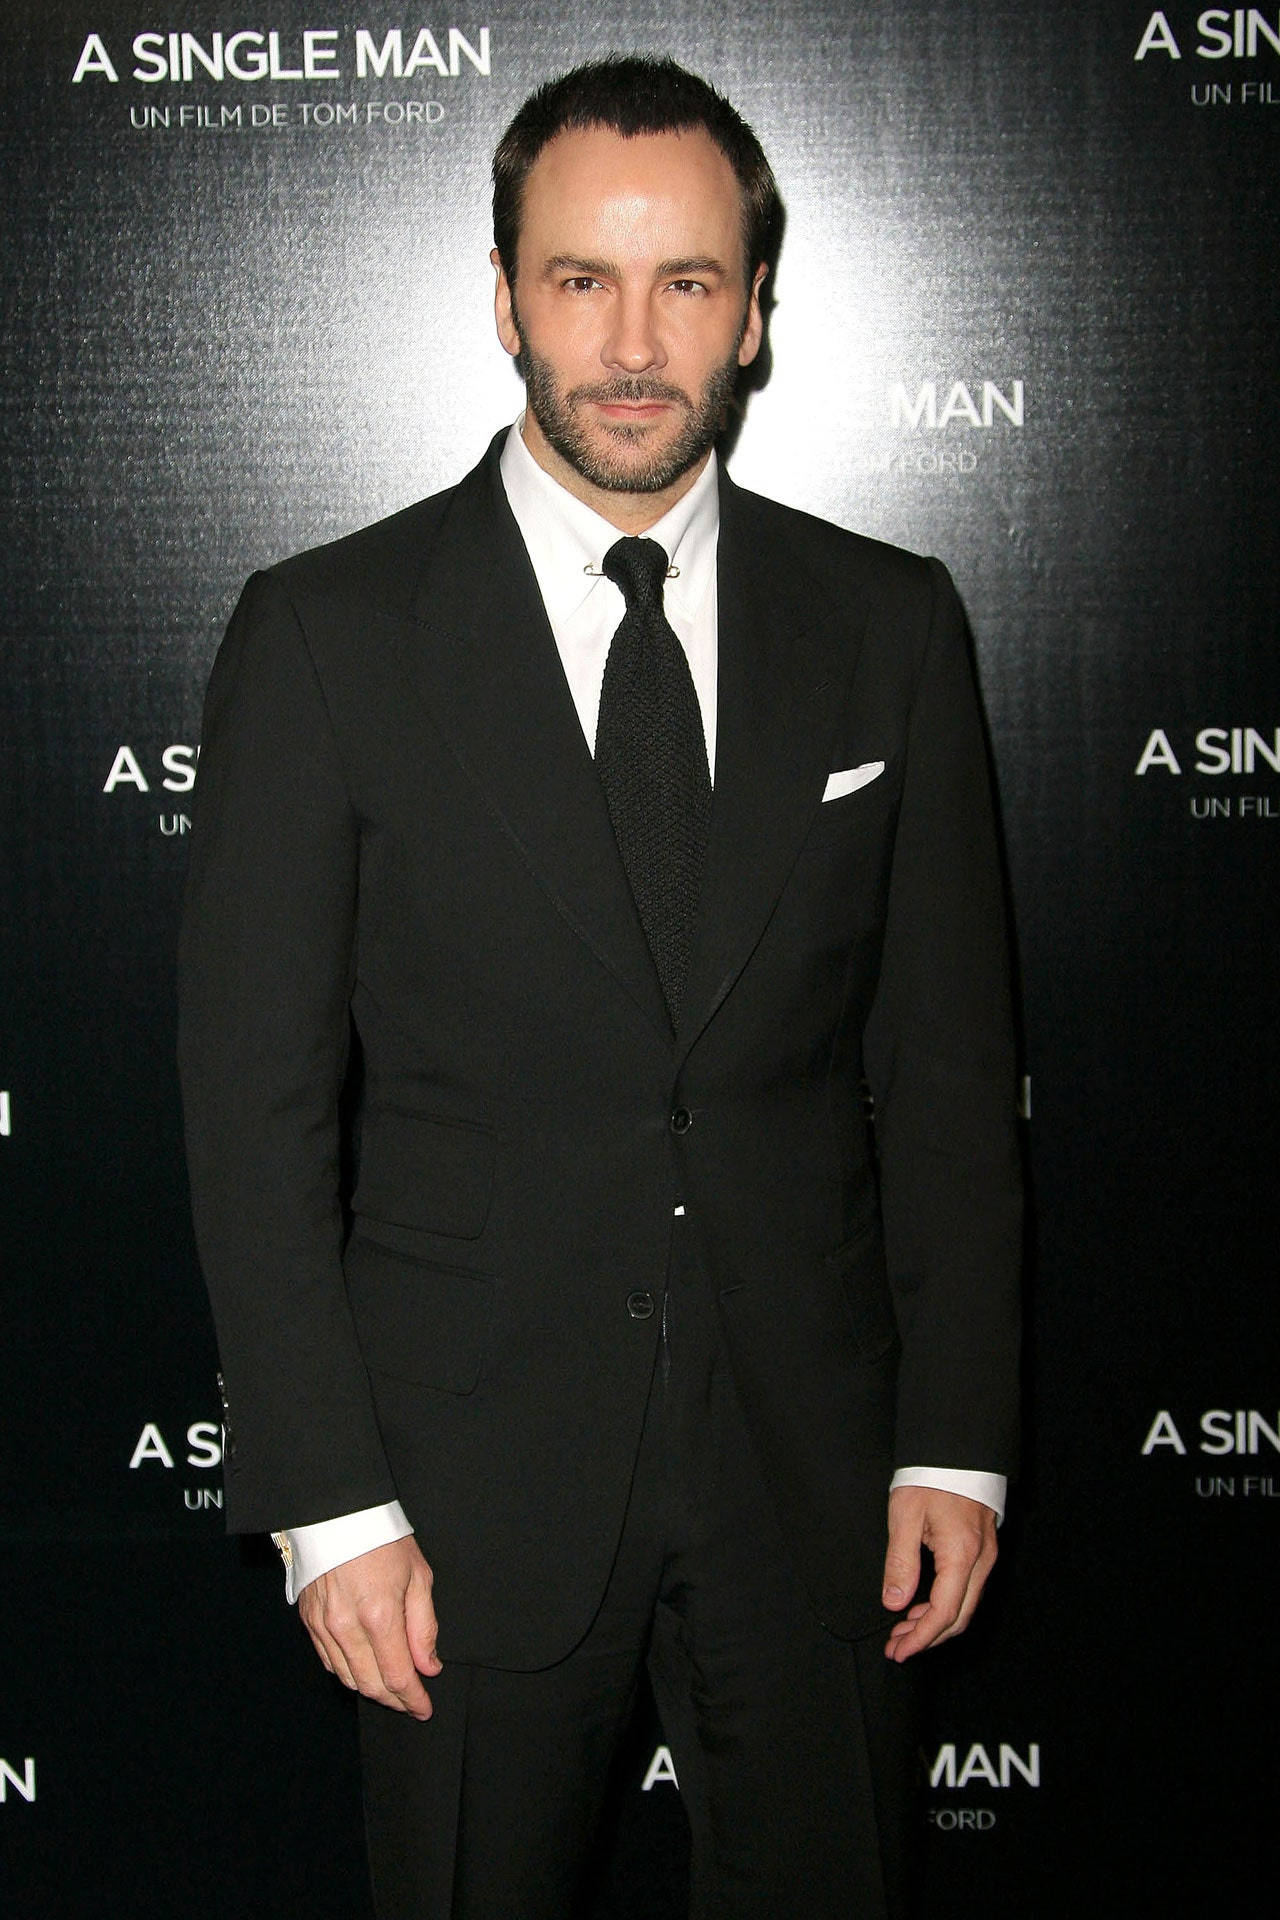 Tom Ford At Film Premiere Background